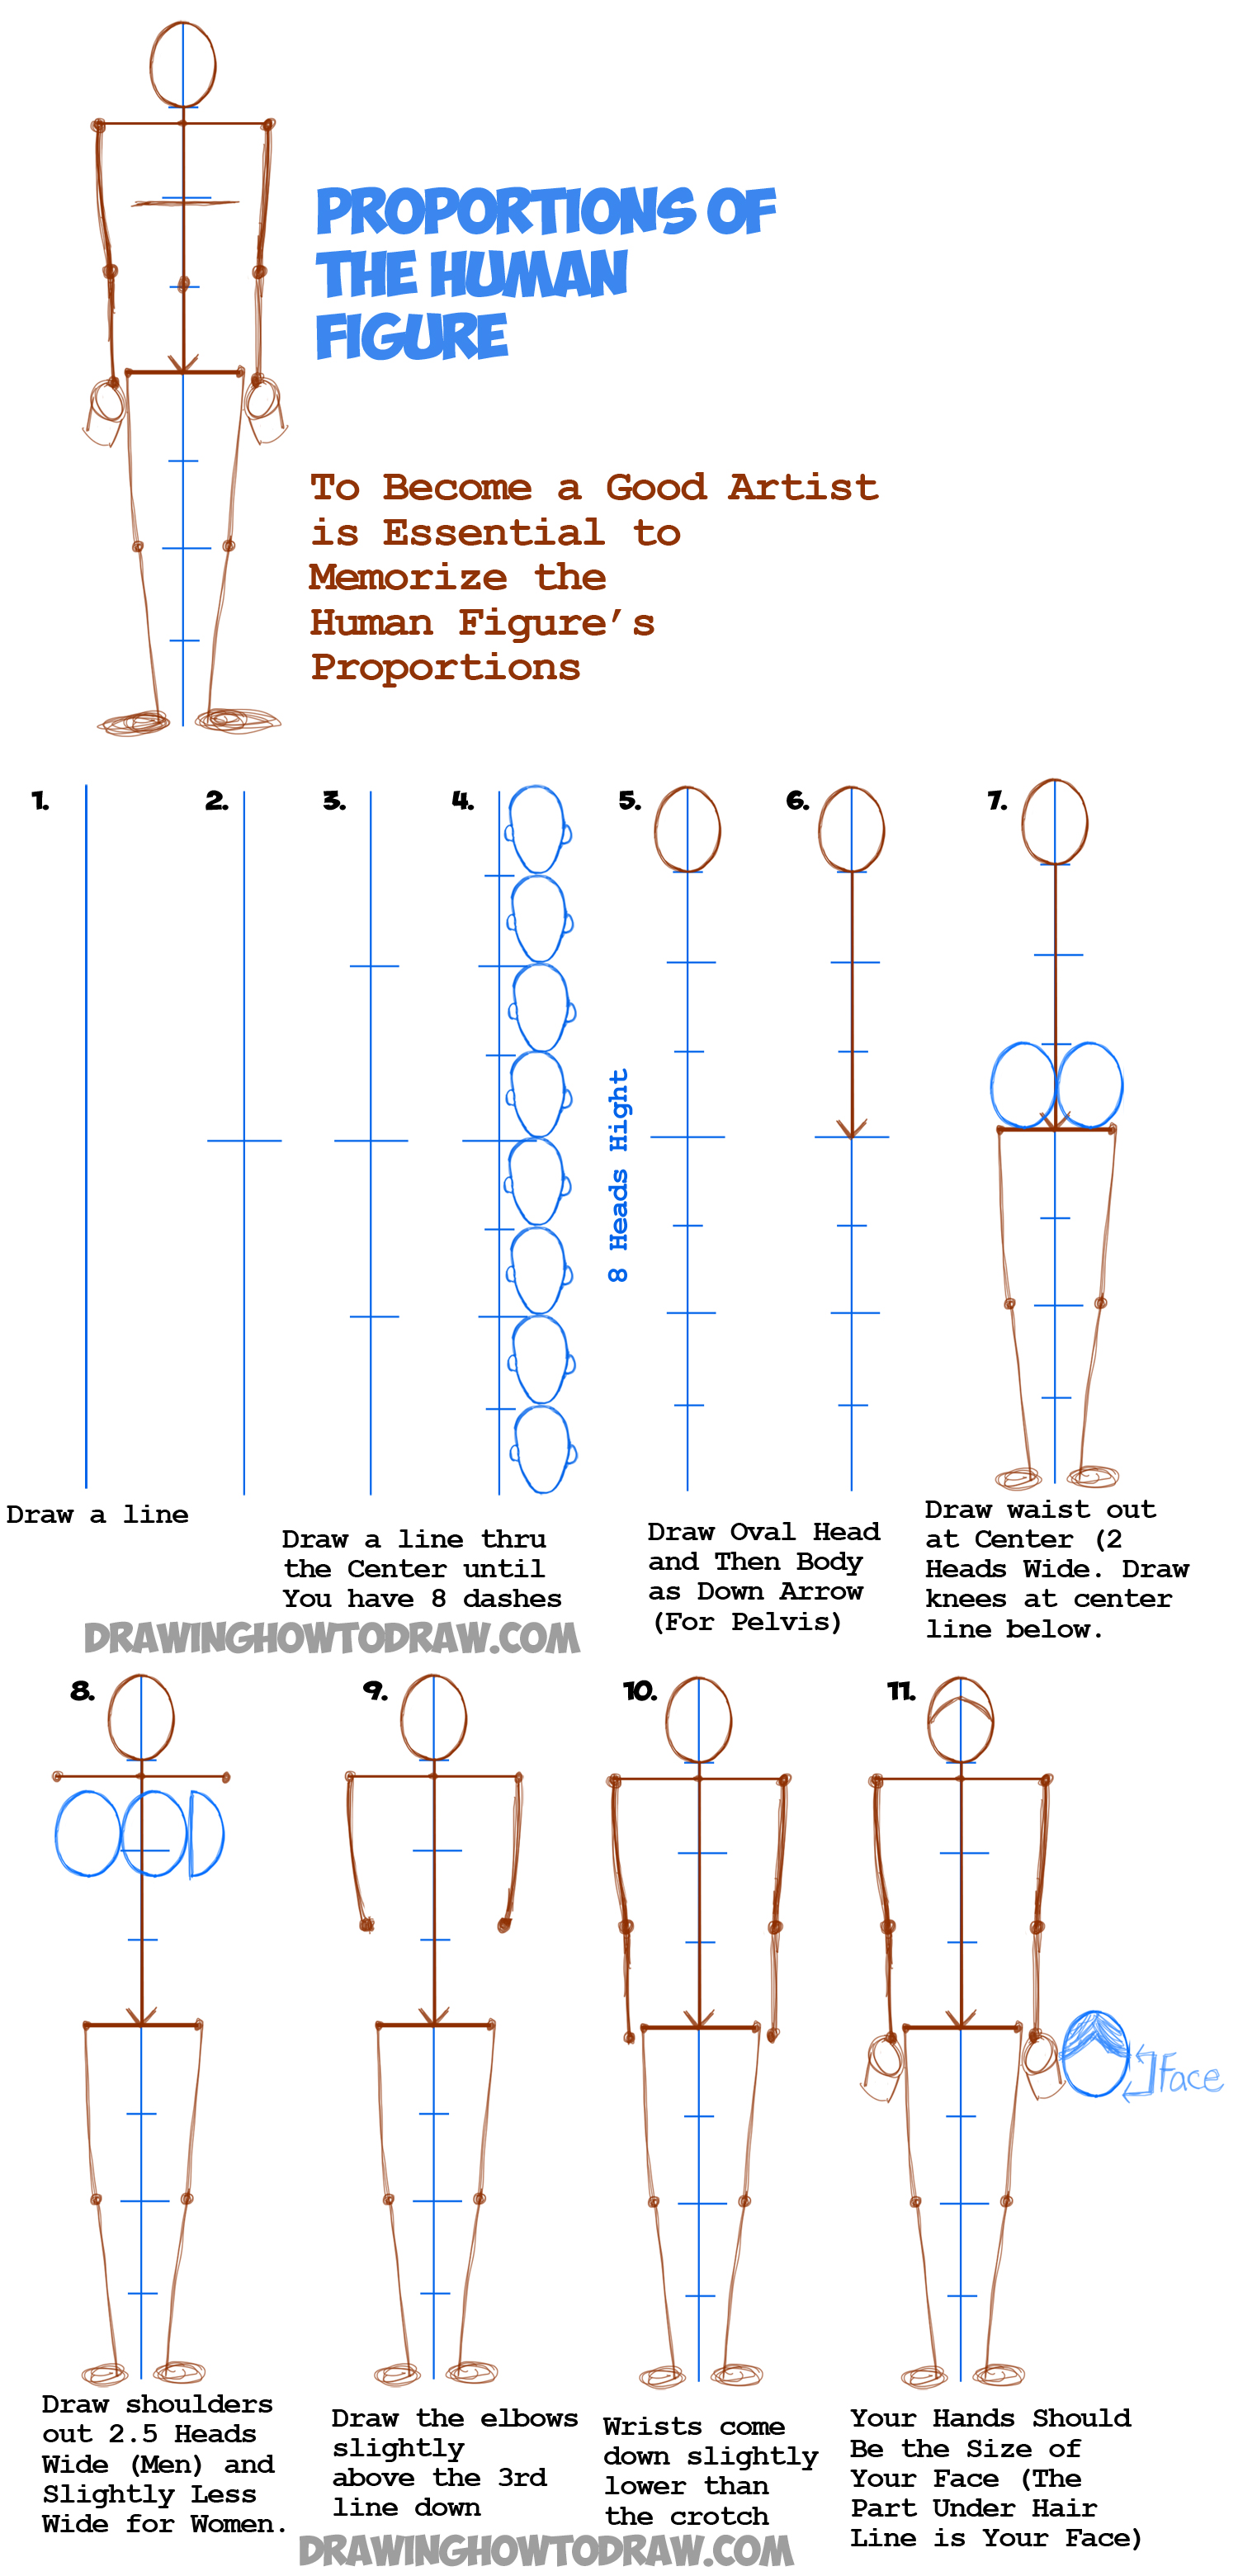 Learn How to Draw Human Figures in Correct Proportions by Memorizing Stick Figures : Drawing People Tutorial